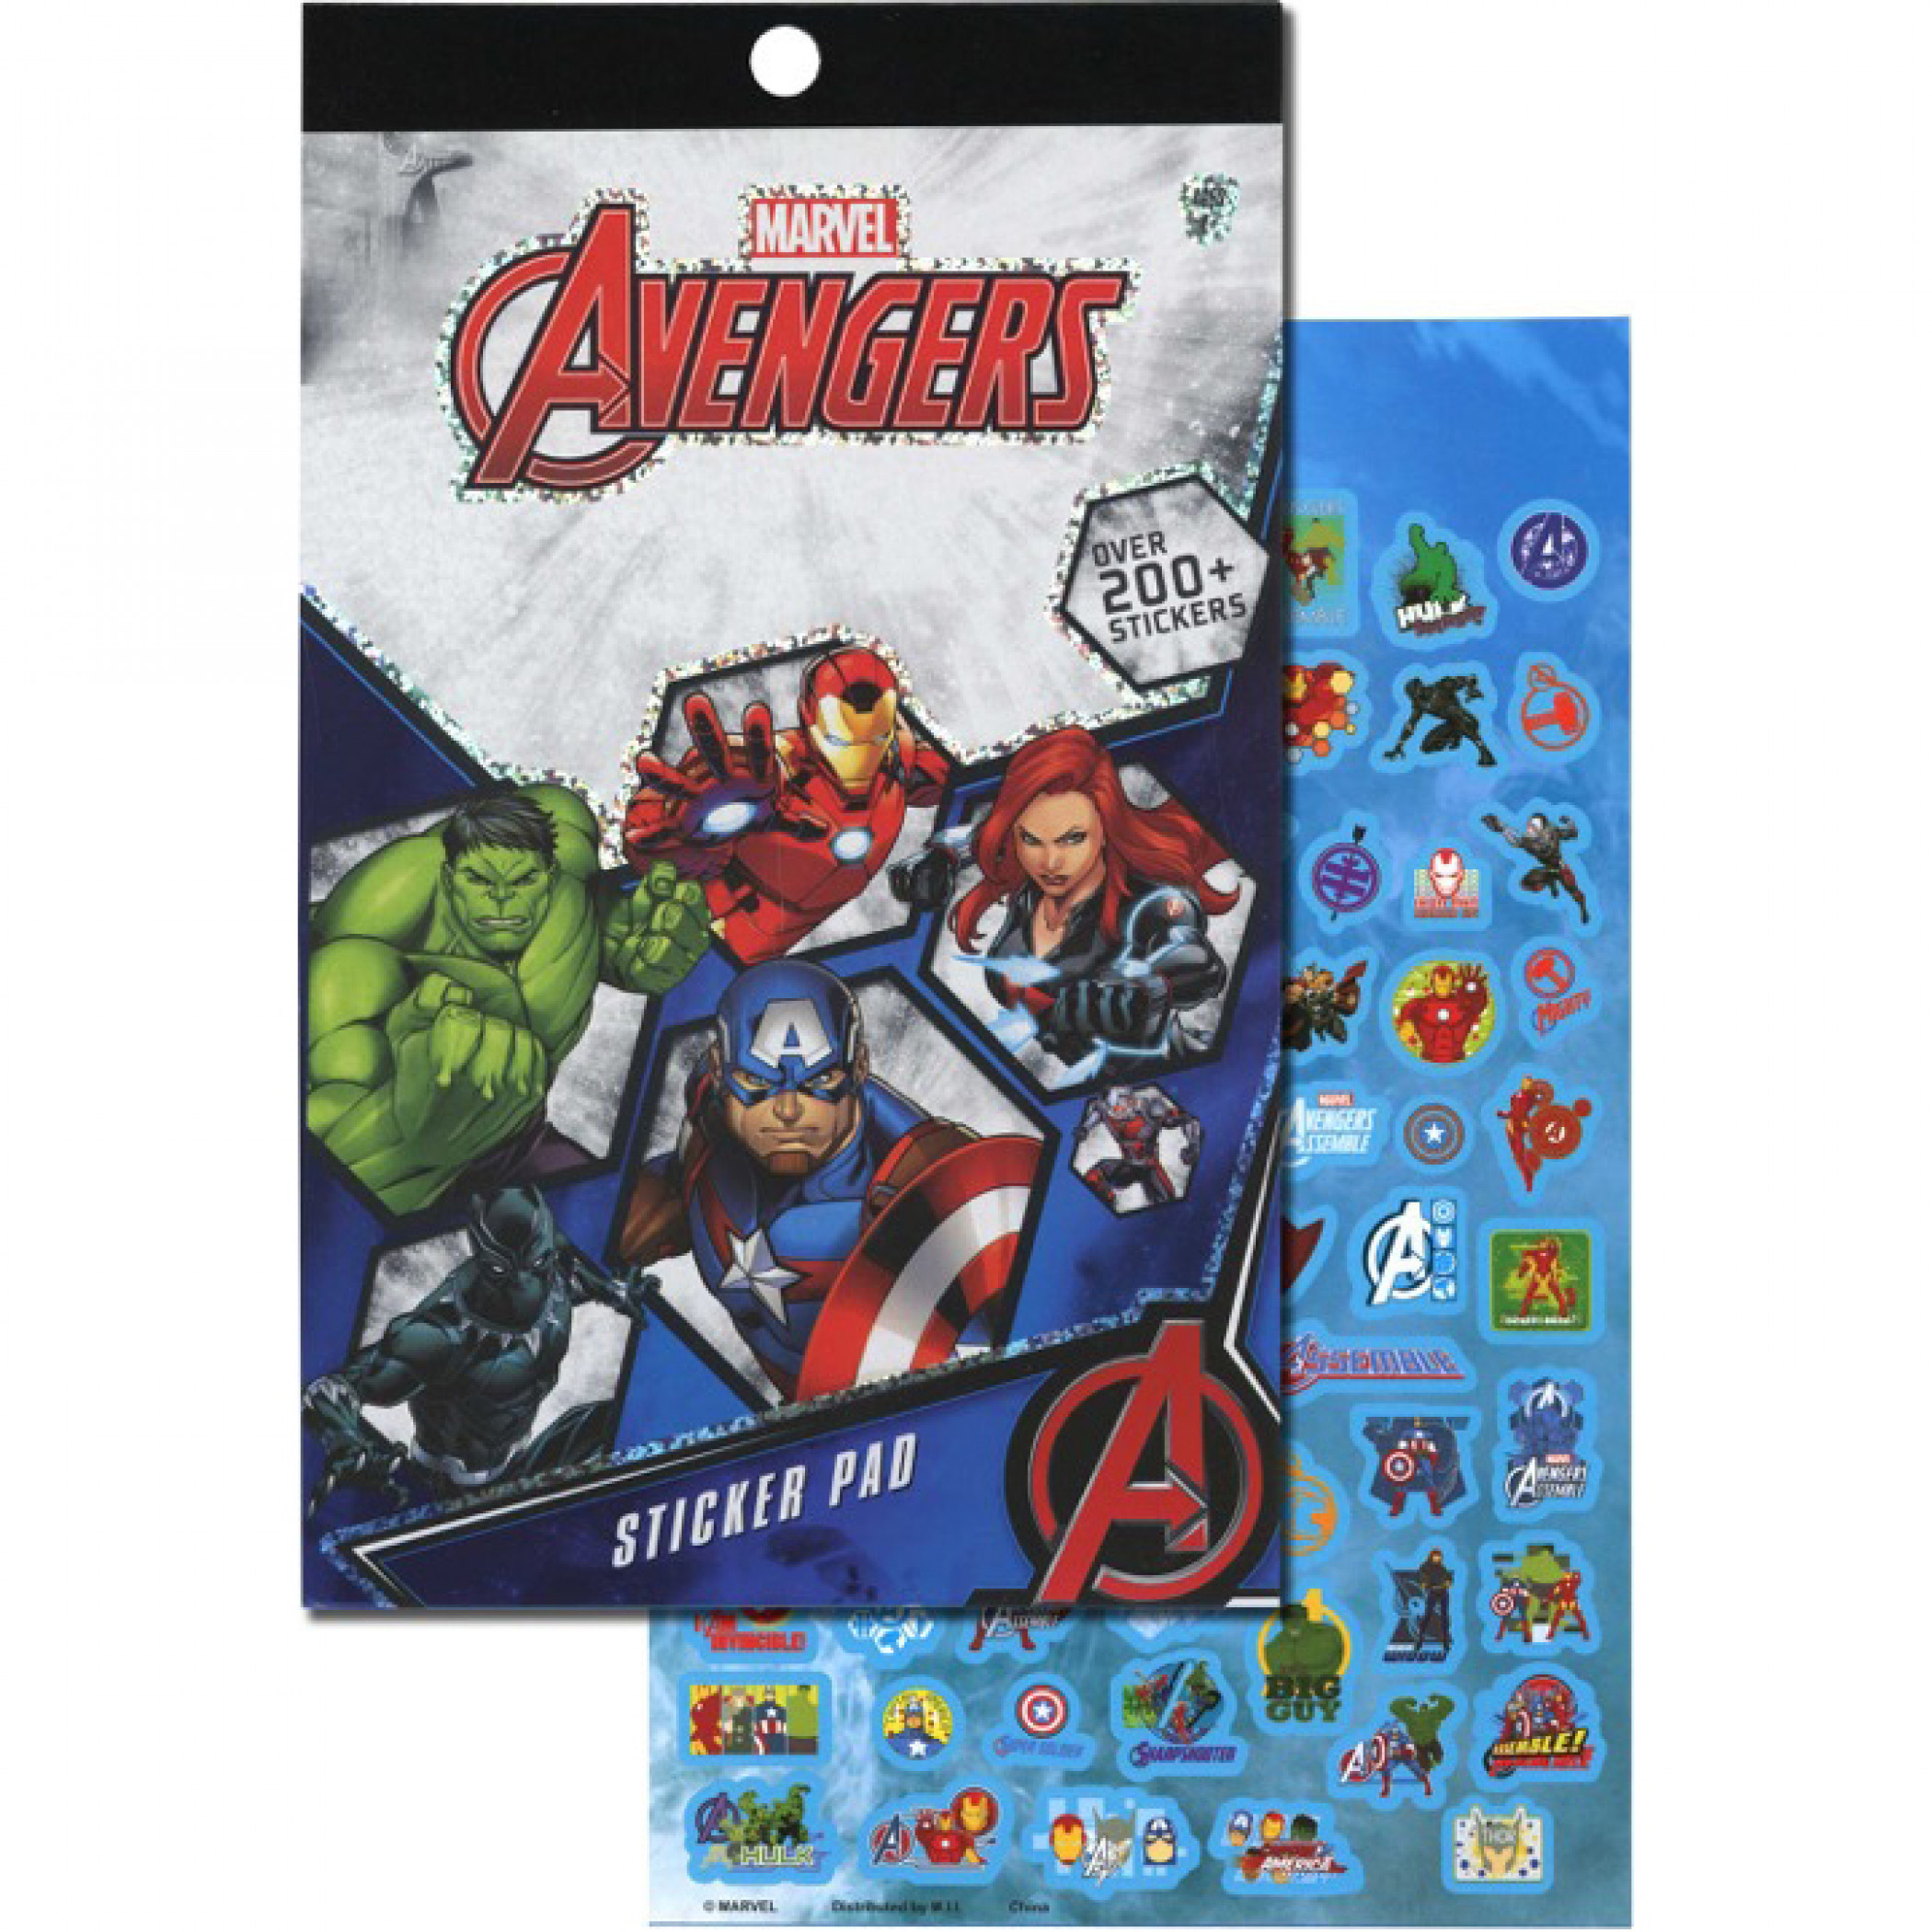 Avengers 4 Sheet Foil Cover 200+ Stickers